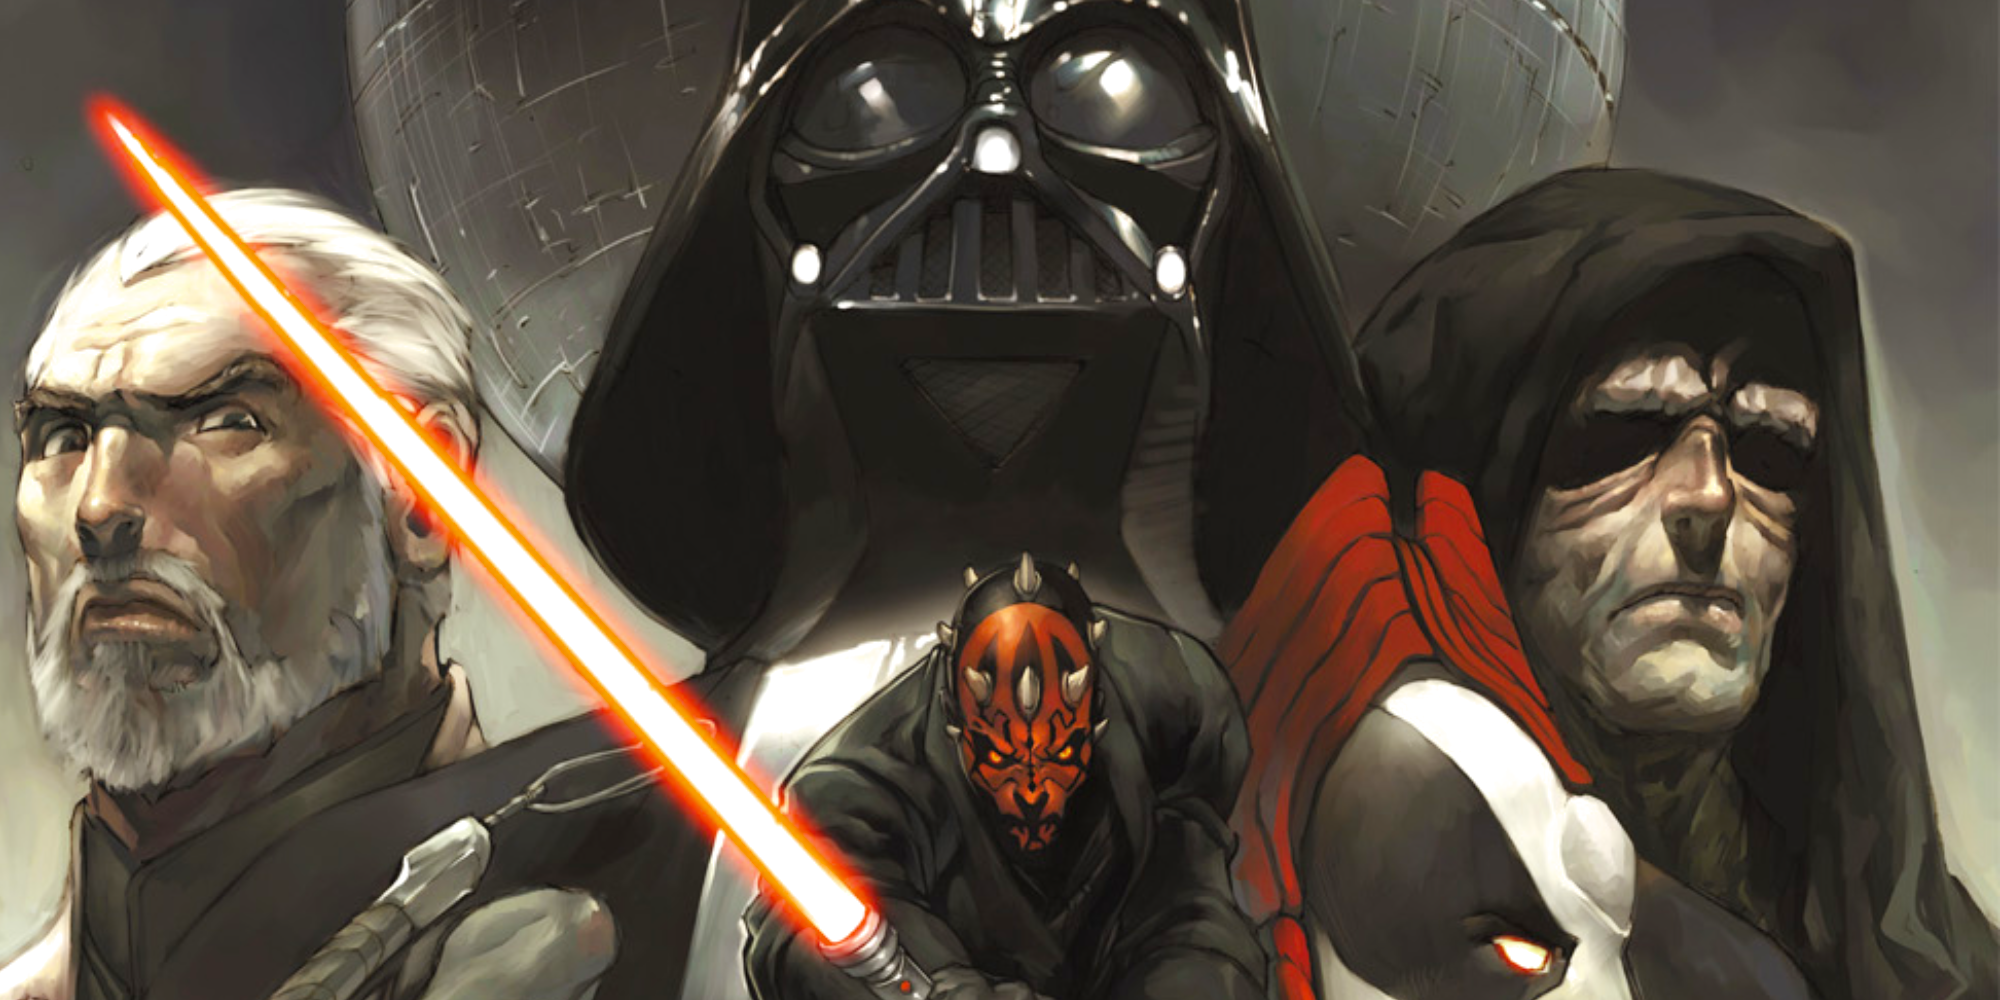 Disney Star Wars Has Improved The Jedi – Now Do The Same For The Sith!